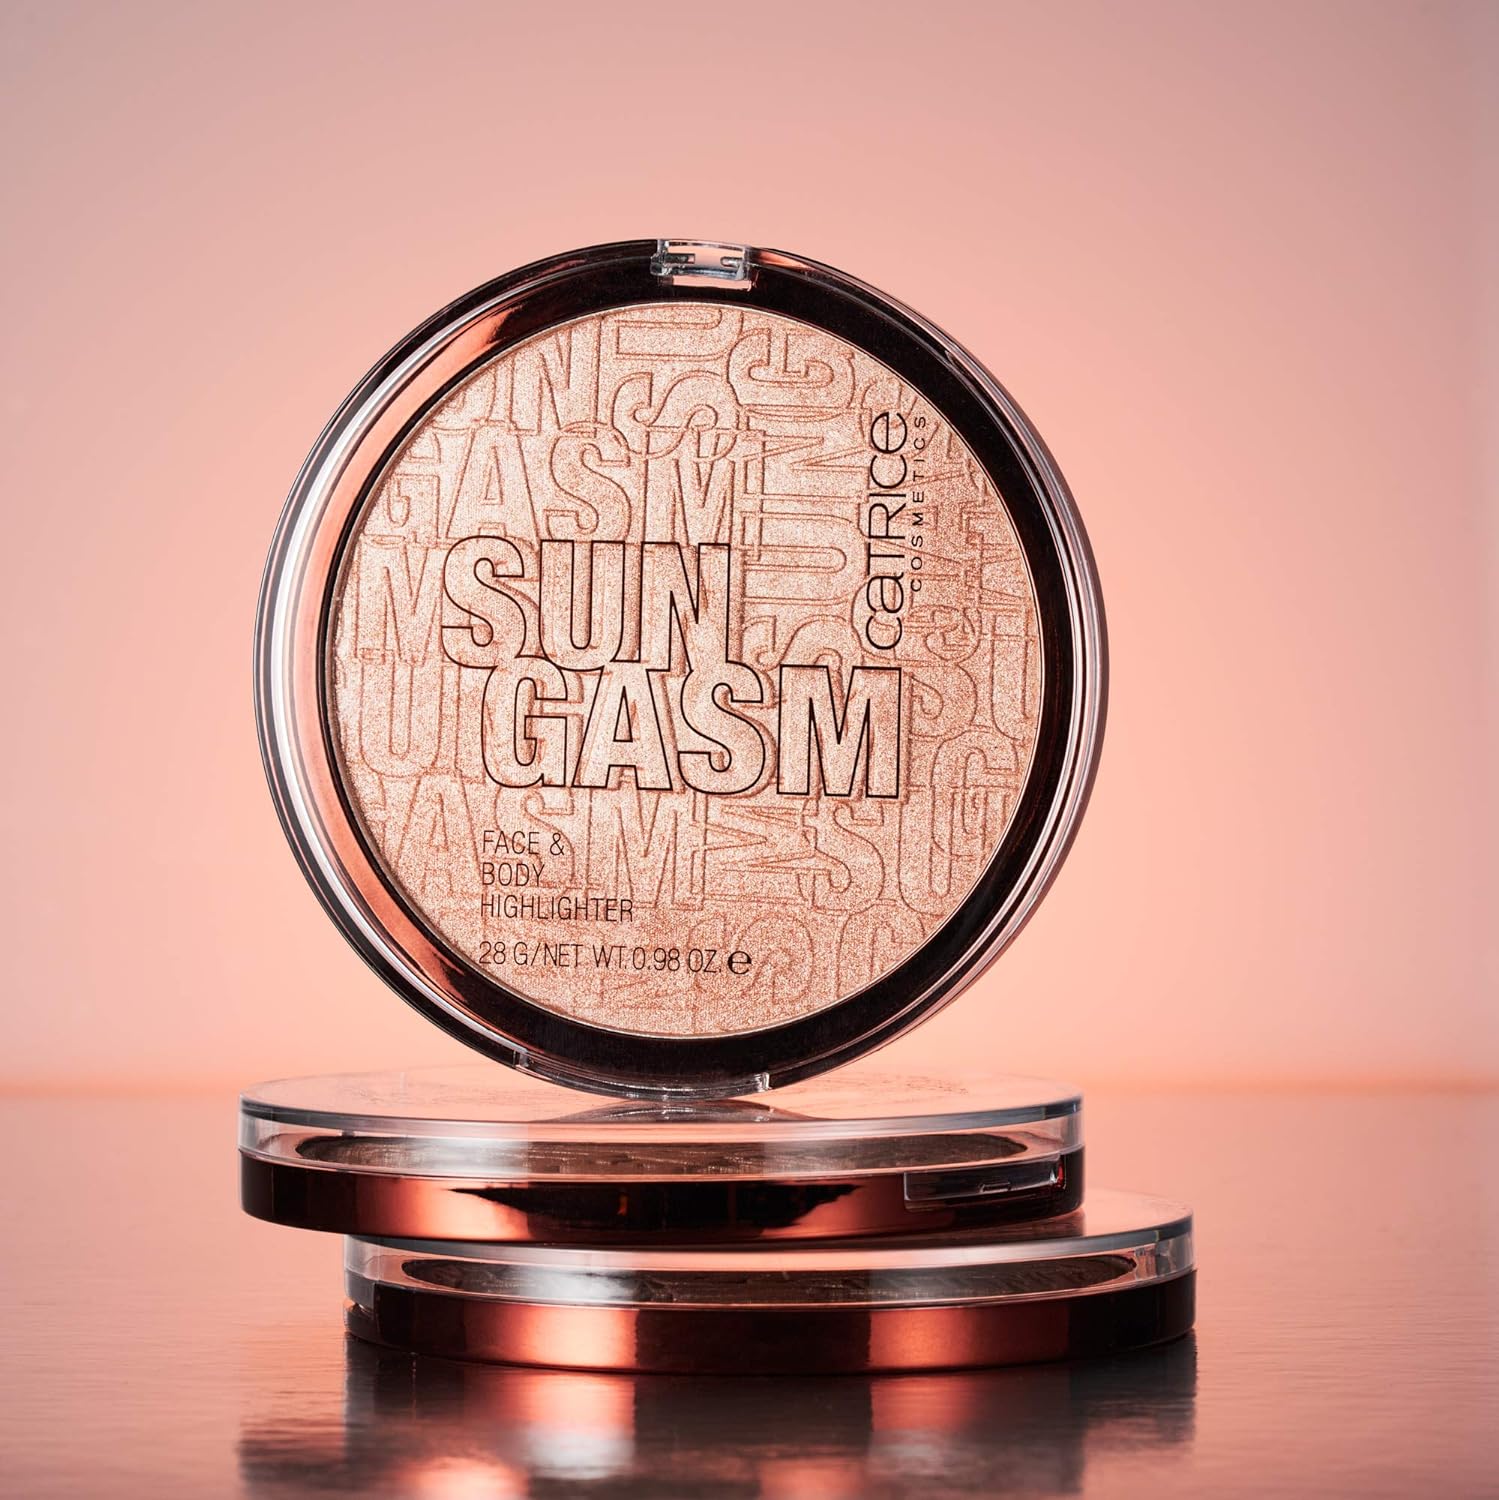 Catrice | SUNGASM Face & Body Highlighter | Jumbo Sized, Sil